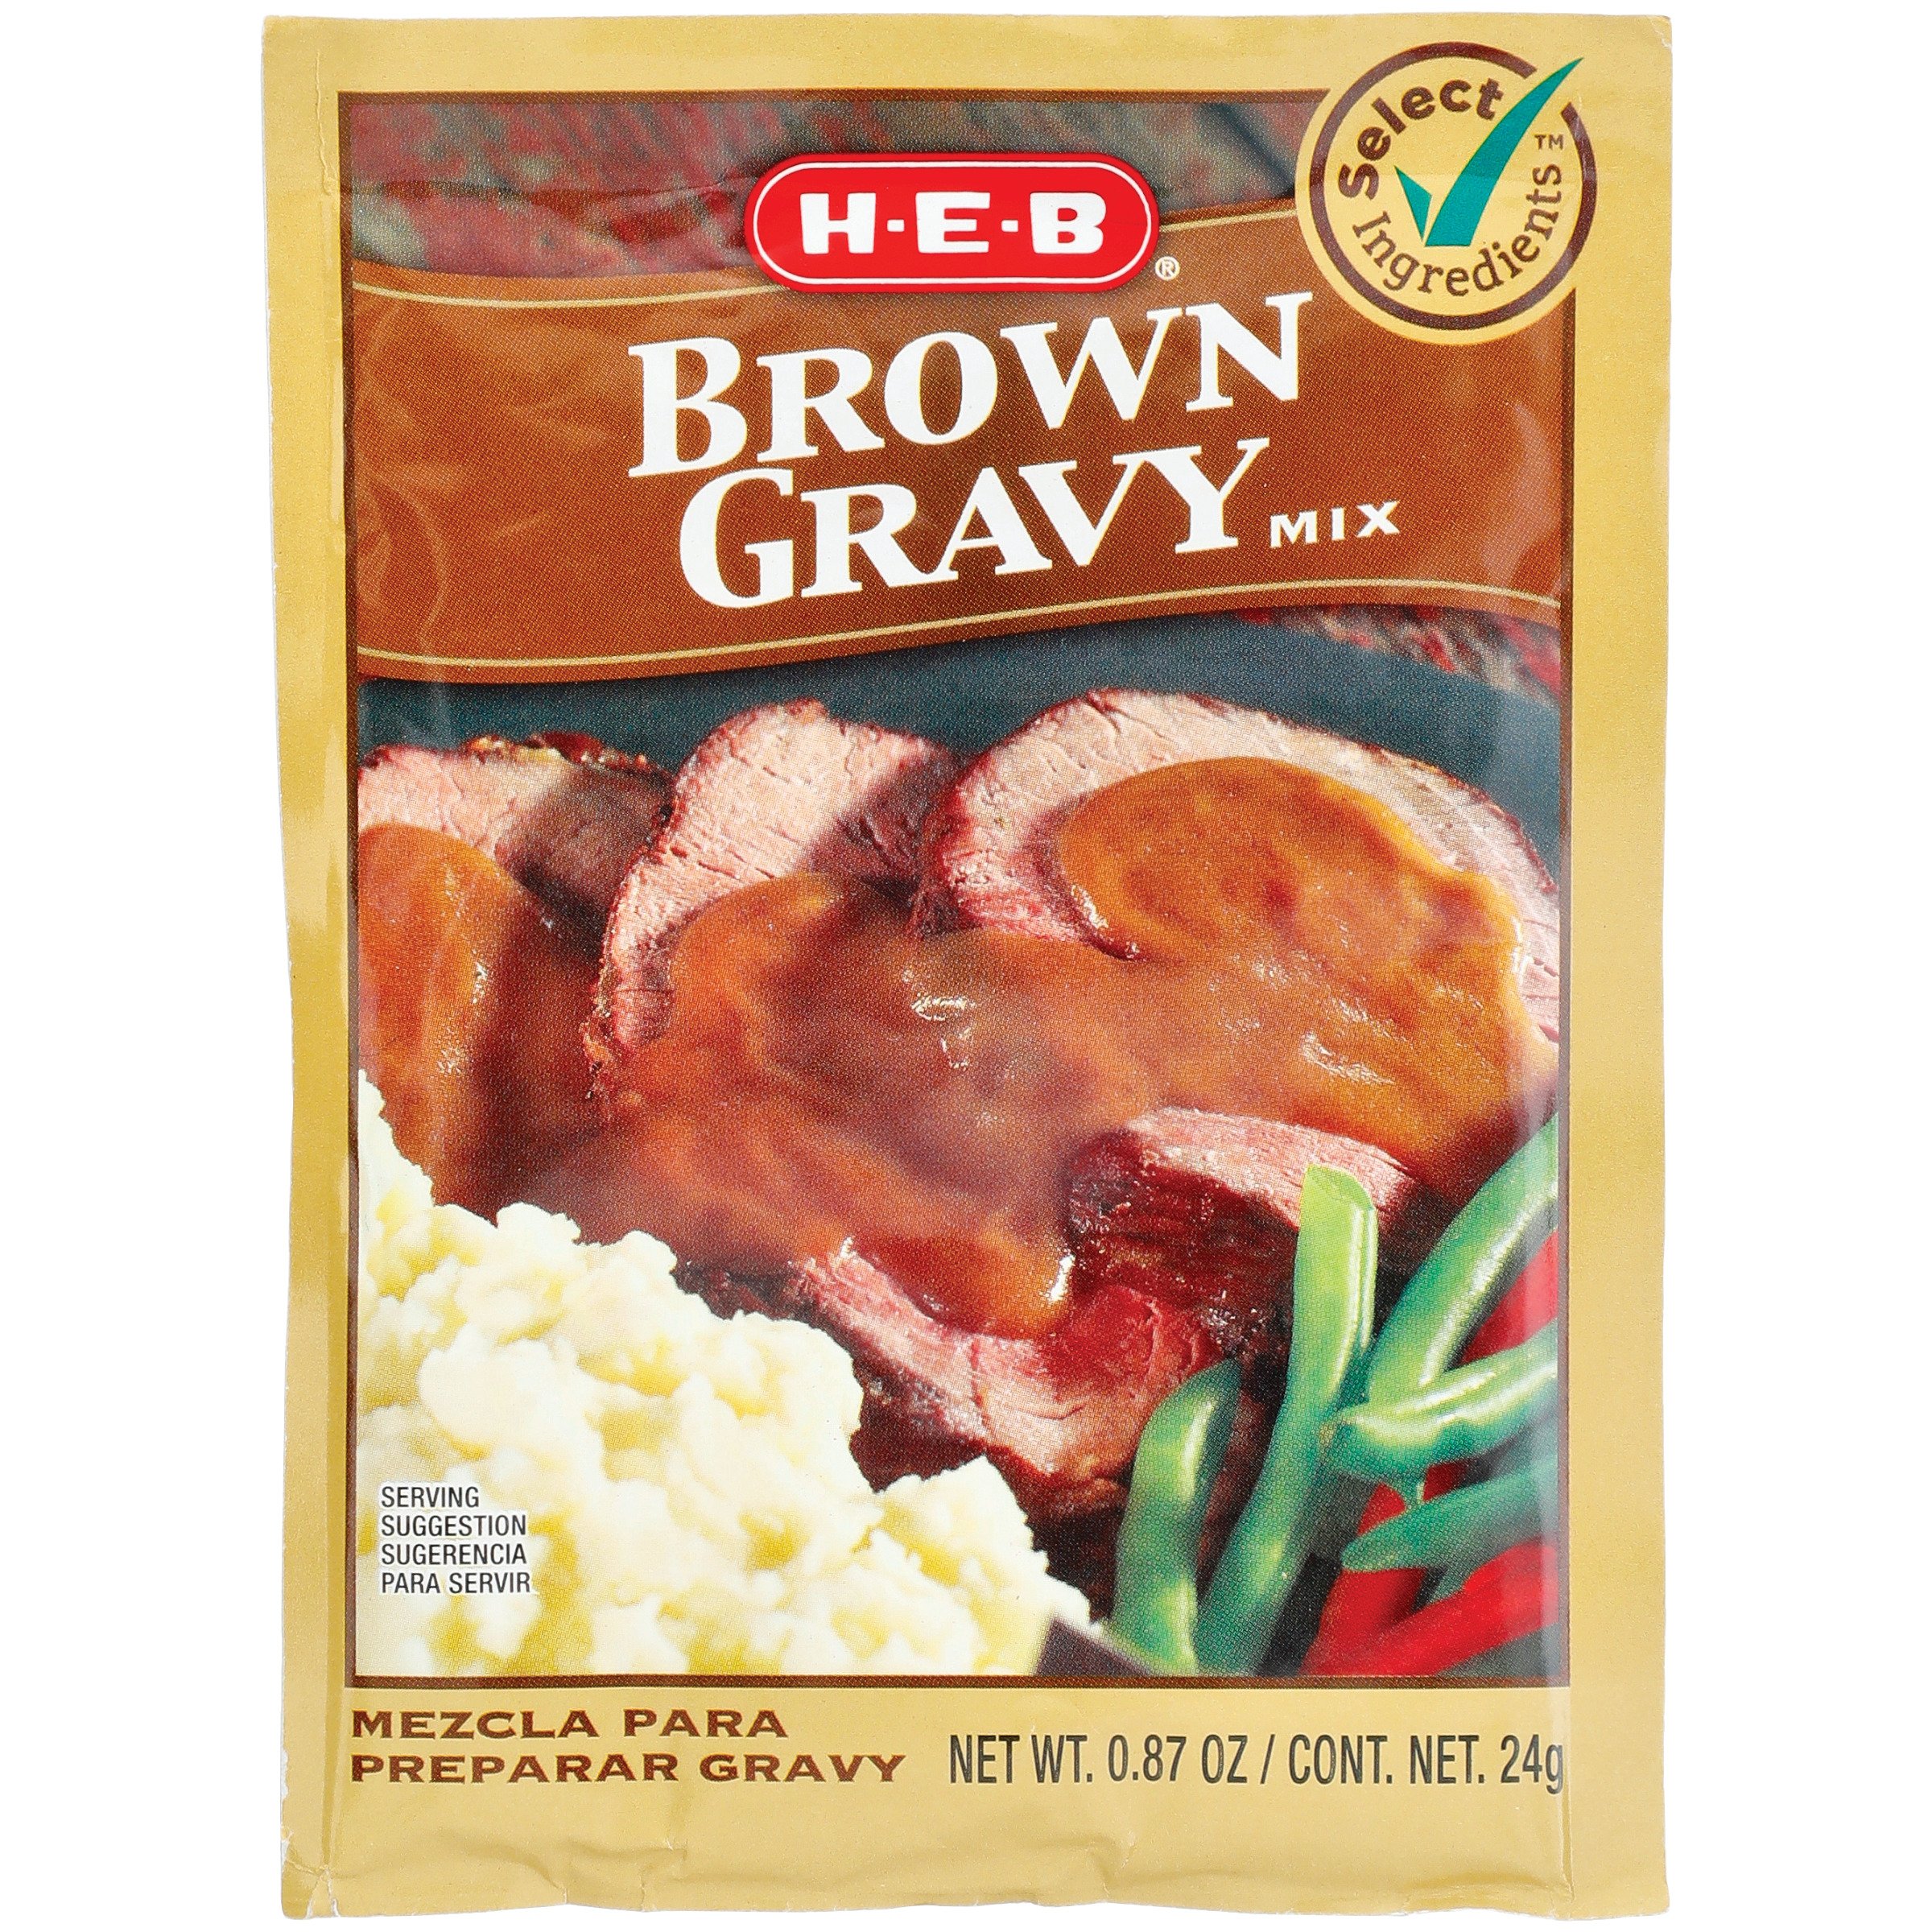 https://images.heb.com/is/image/HEBGrocery/000706443-1